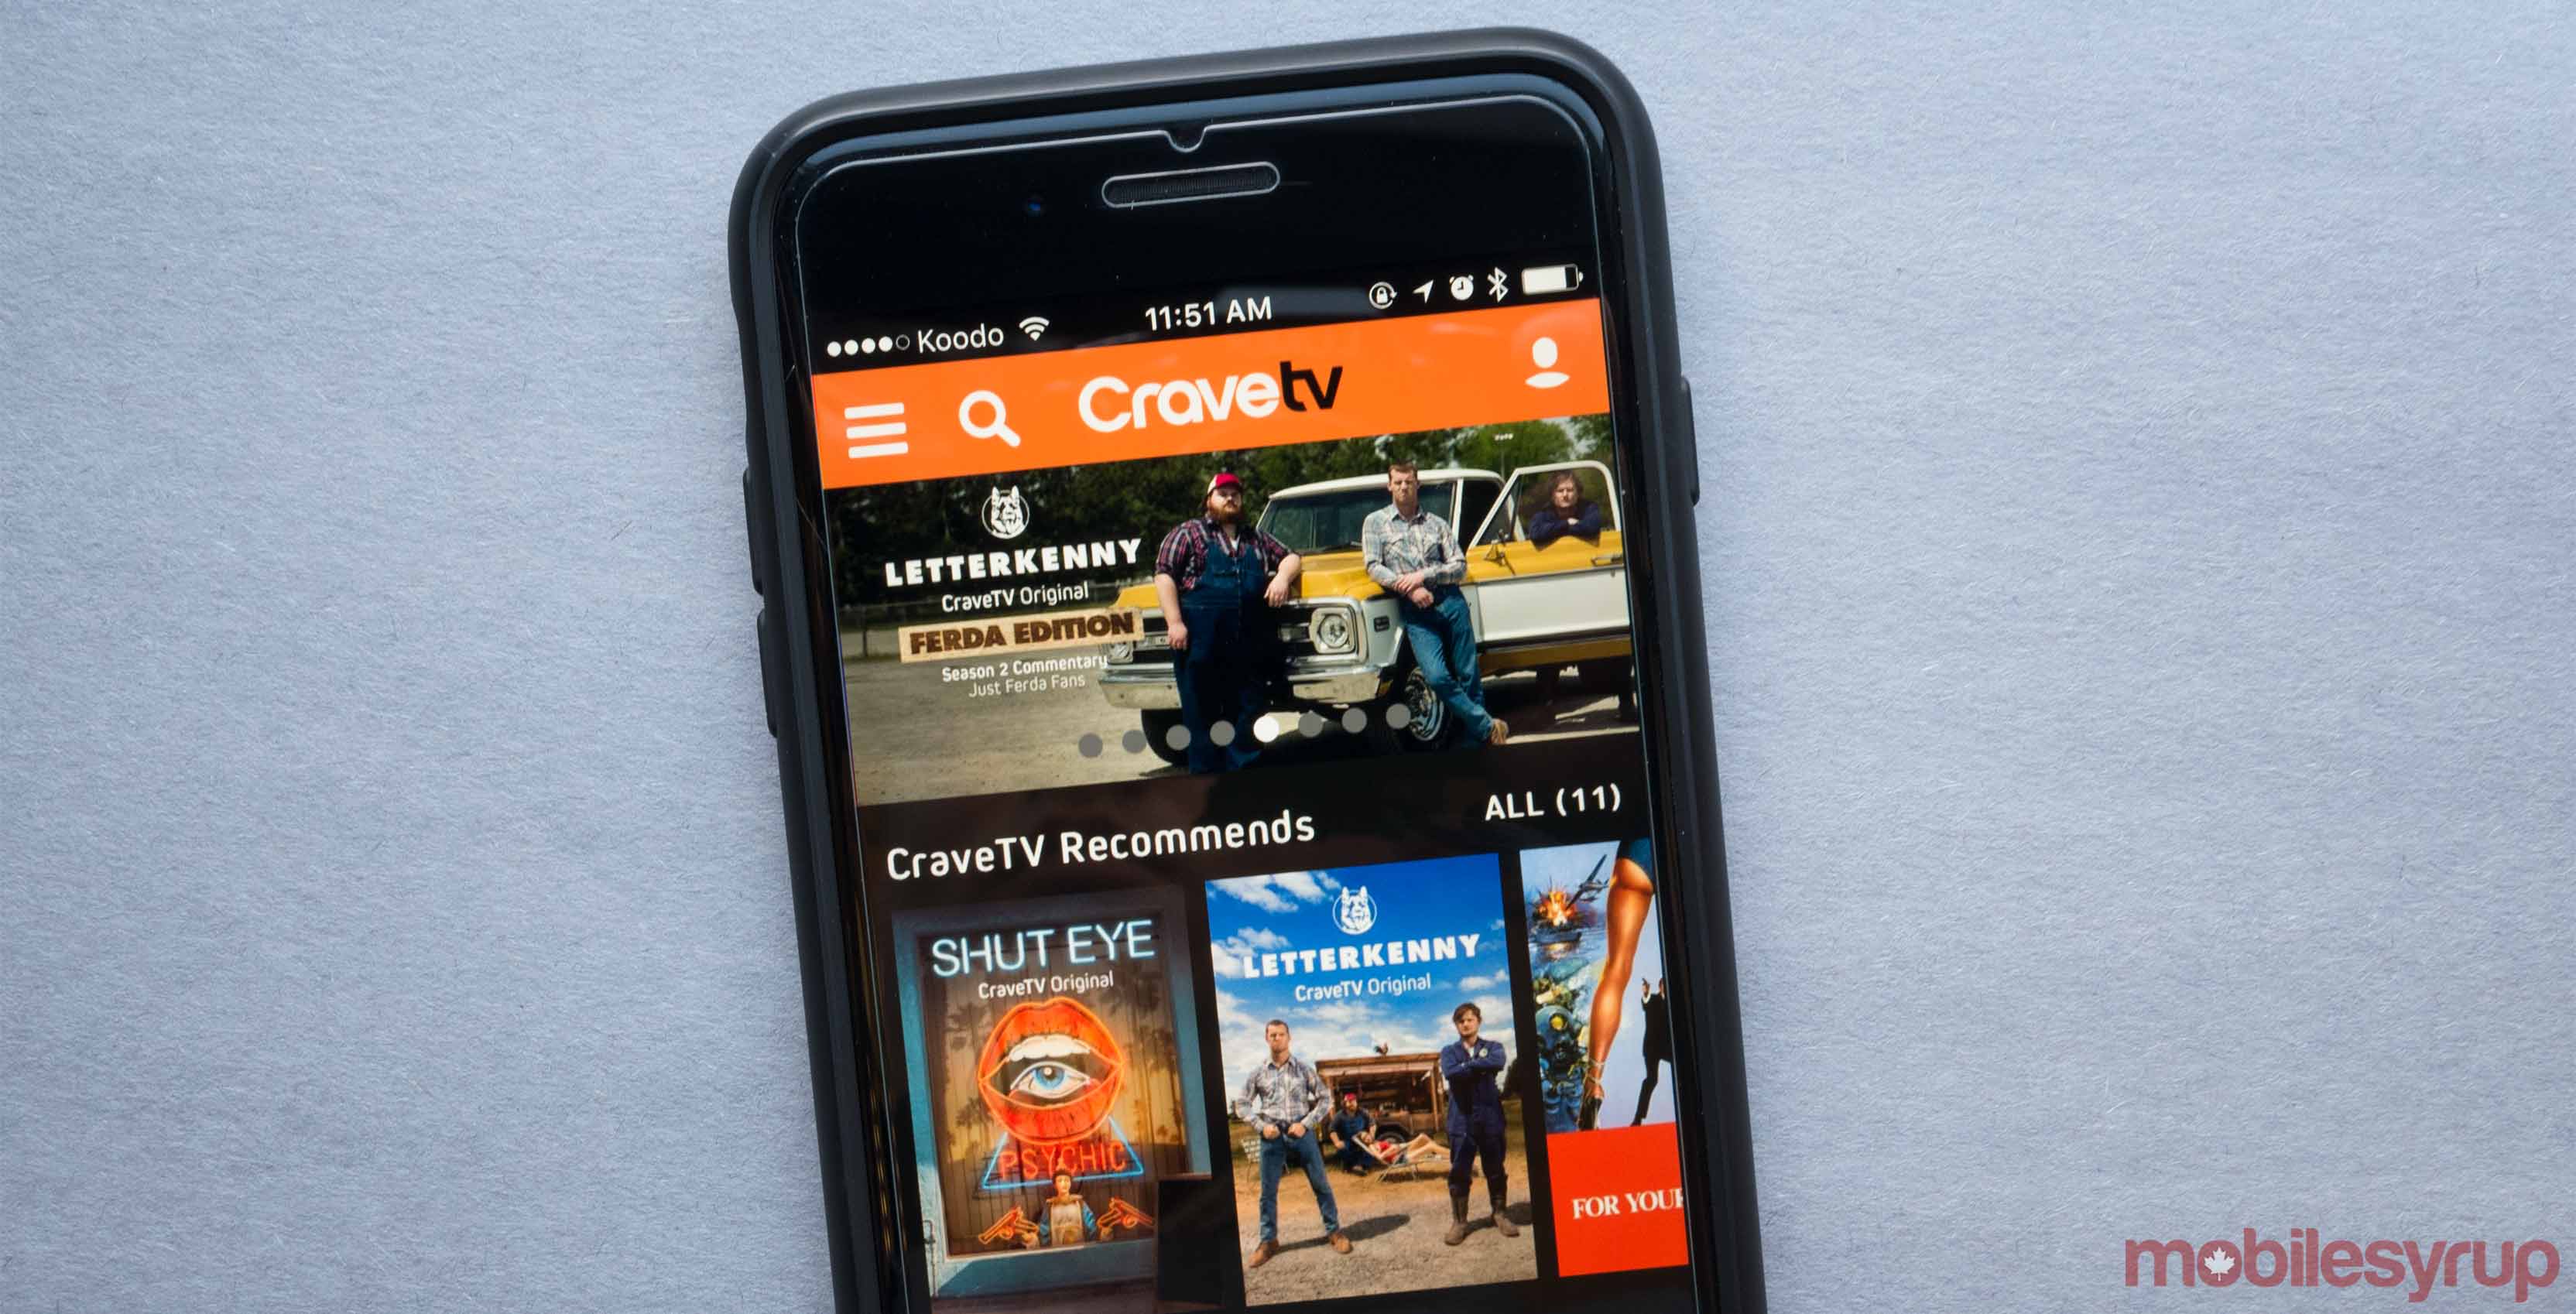 Crave TV app on a smartphone